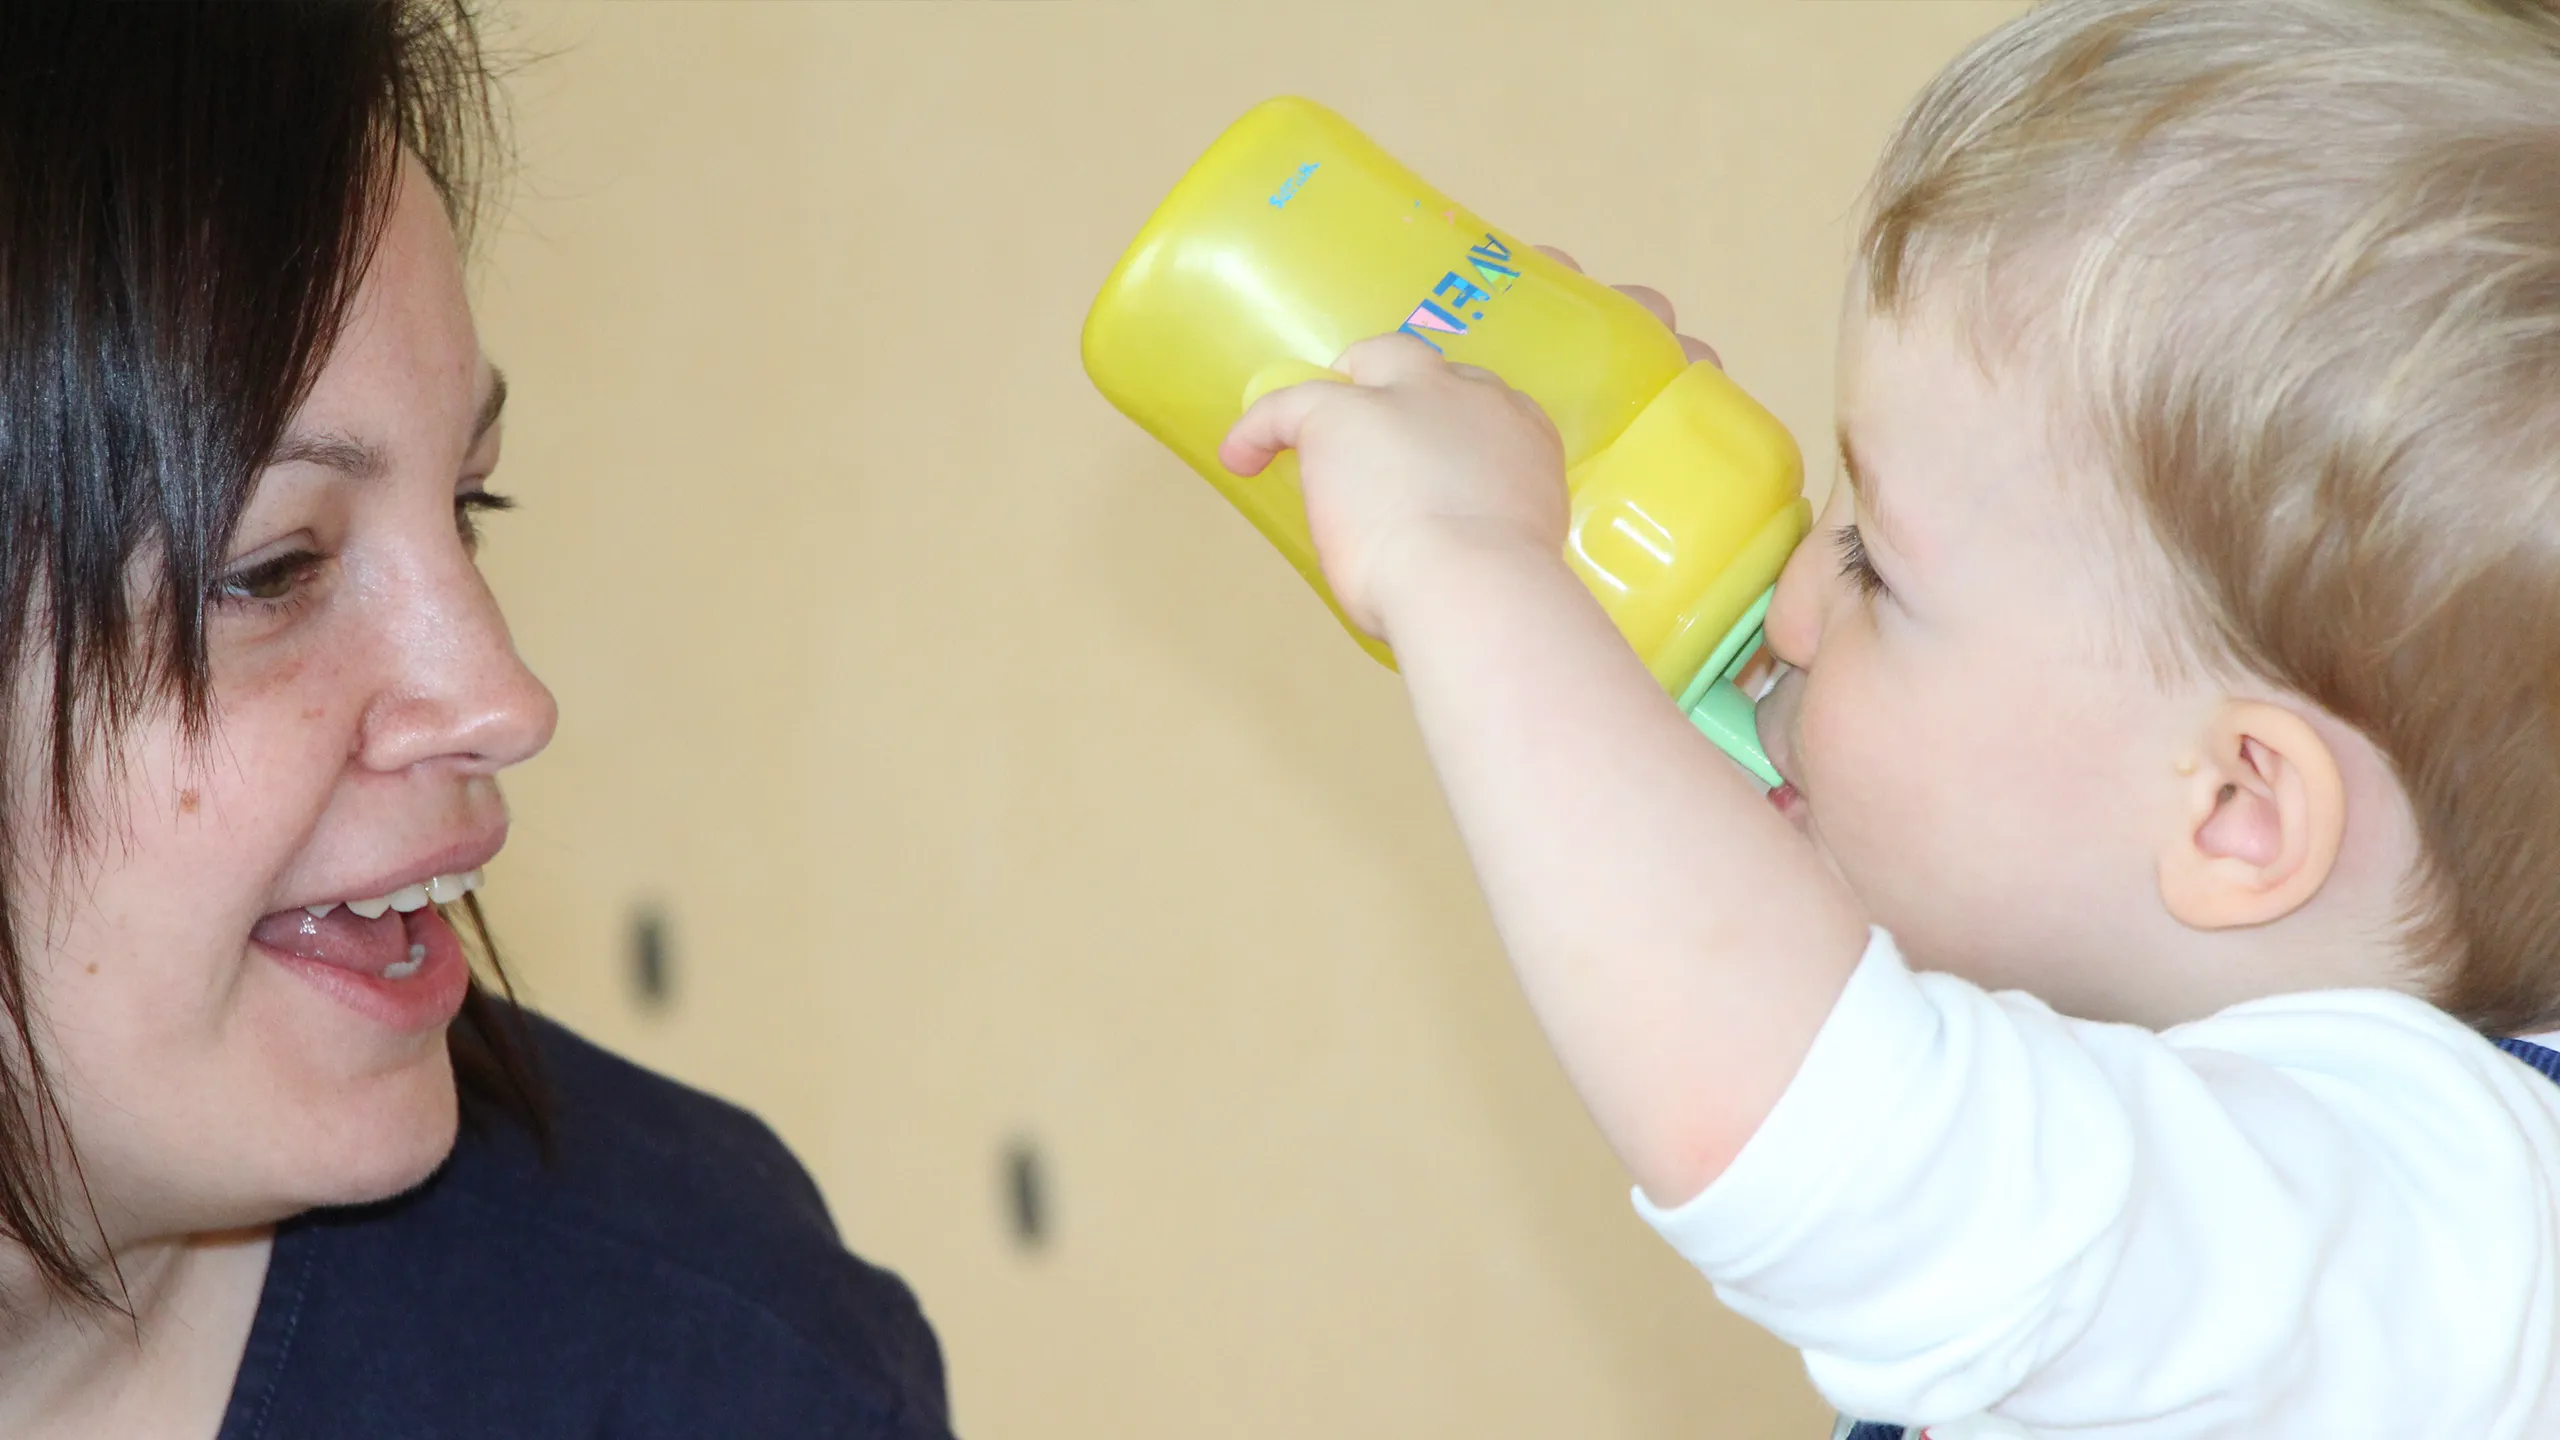 Our caregivers ensure that all children stay hydrated.